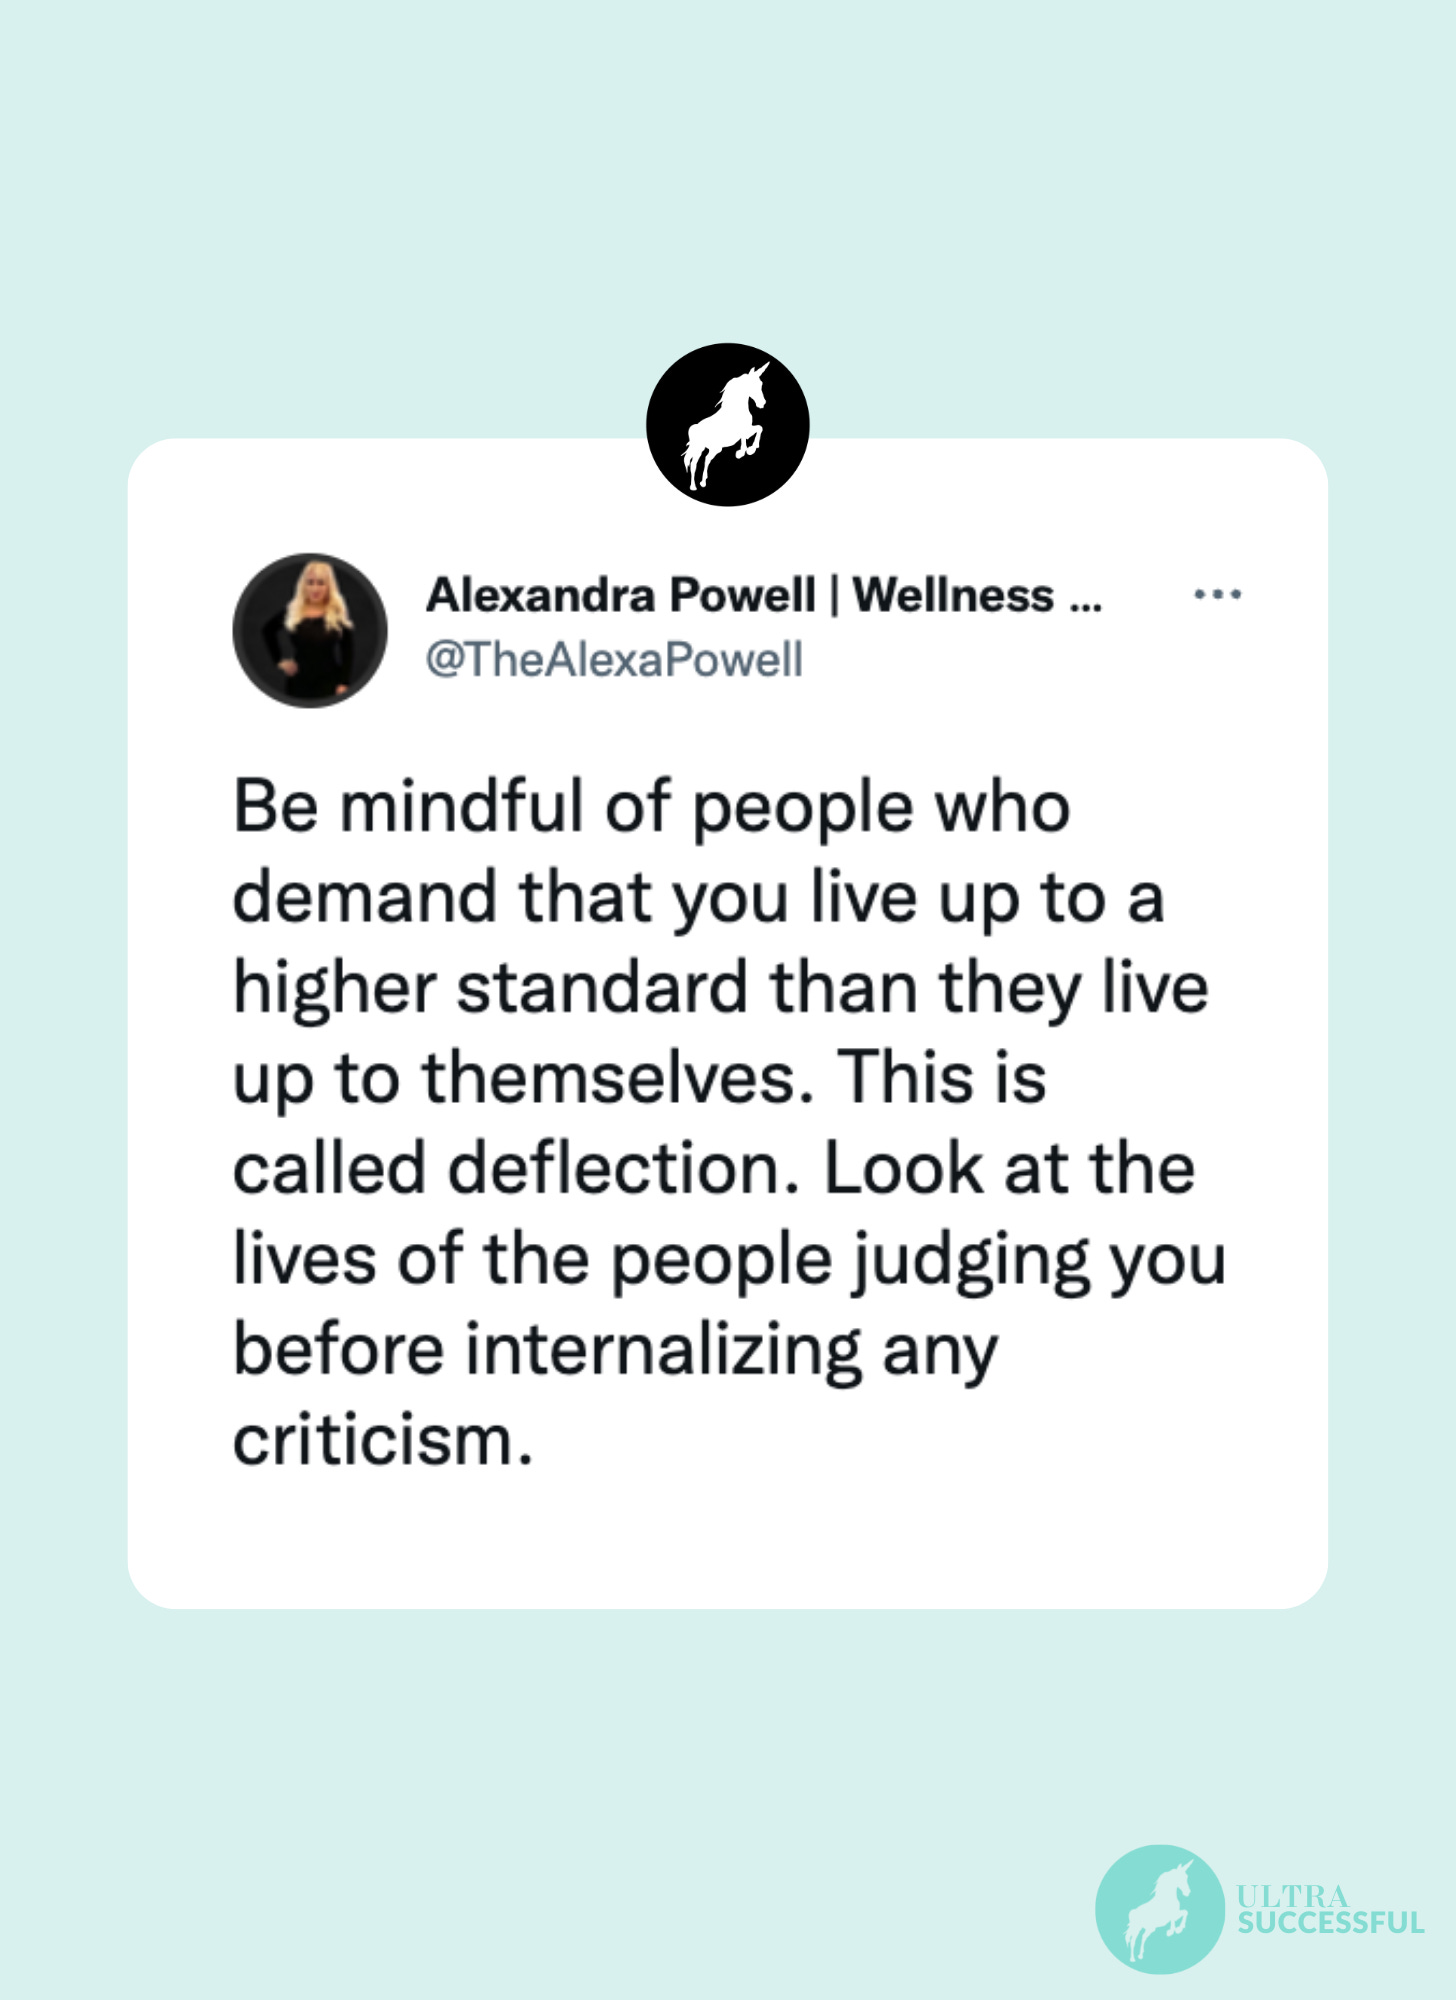 @TheAlexaPowell: Be mindful of people who demand that you live up to a higher standard than they live up to themselves. This is called deflection. Look at the lives of the people judging you before internalizing any criticism.